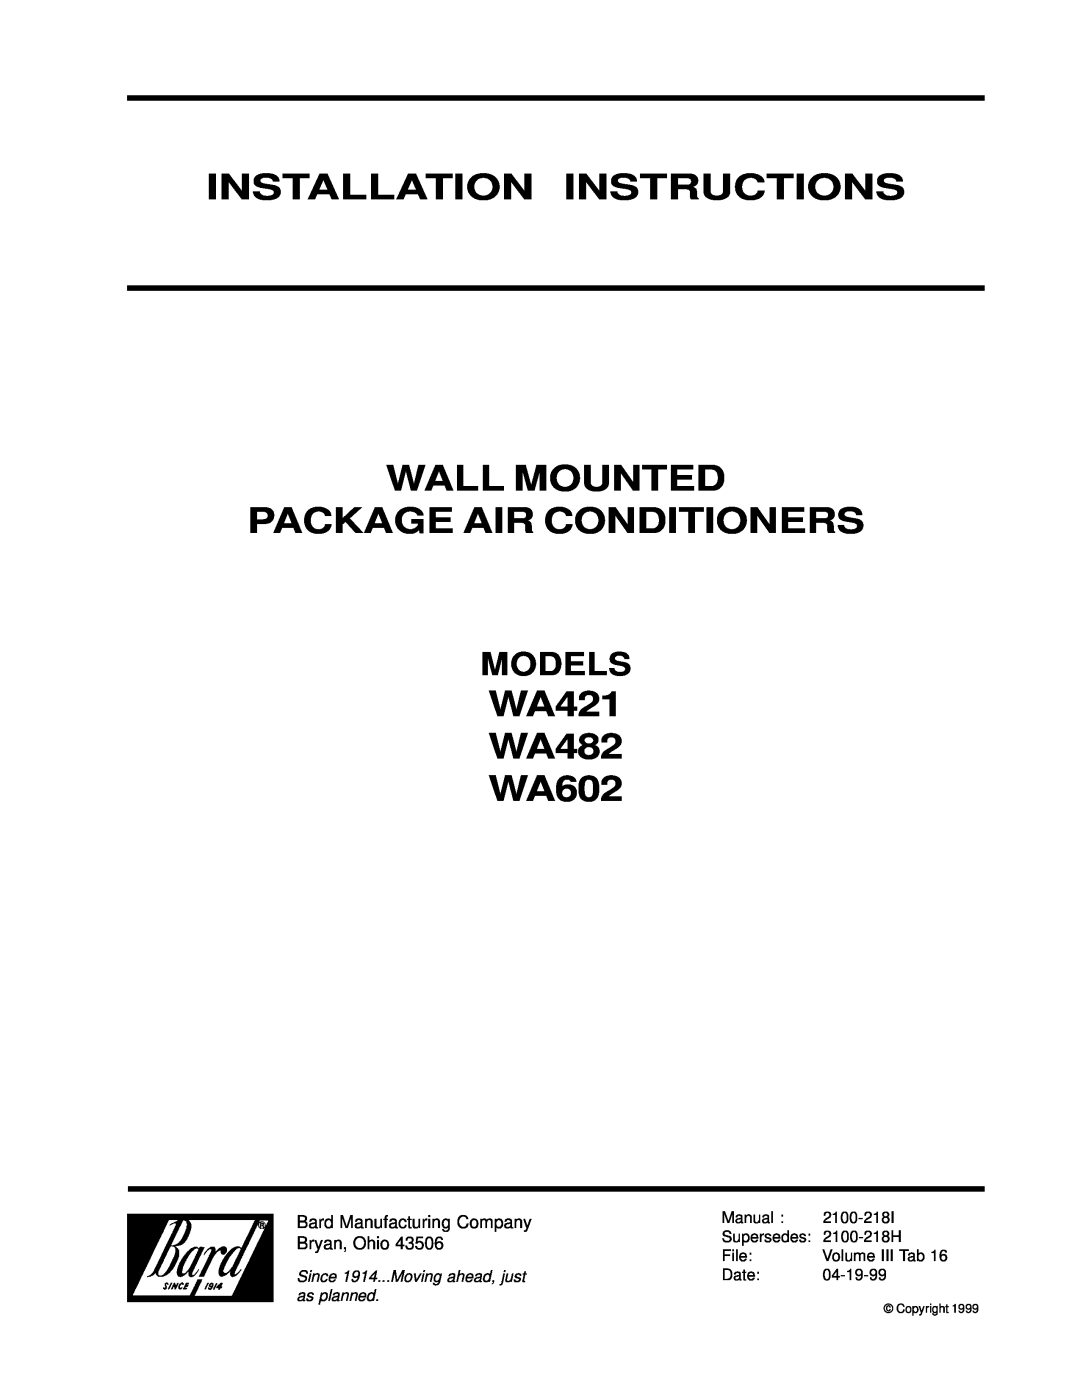 Bard WA482 installation instructions Models, Installation Instructions Wall Mounted, Package Air Conditioners, as planned 